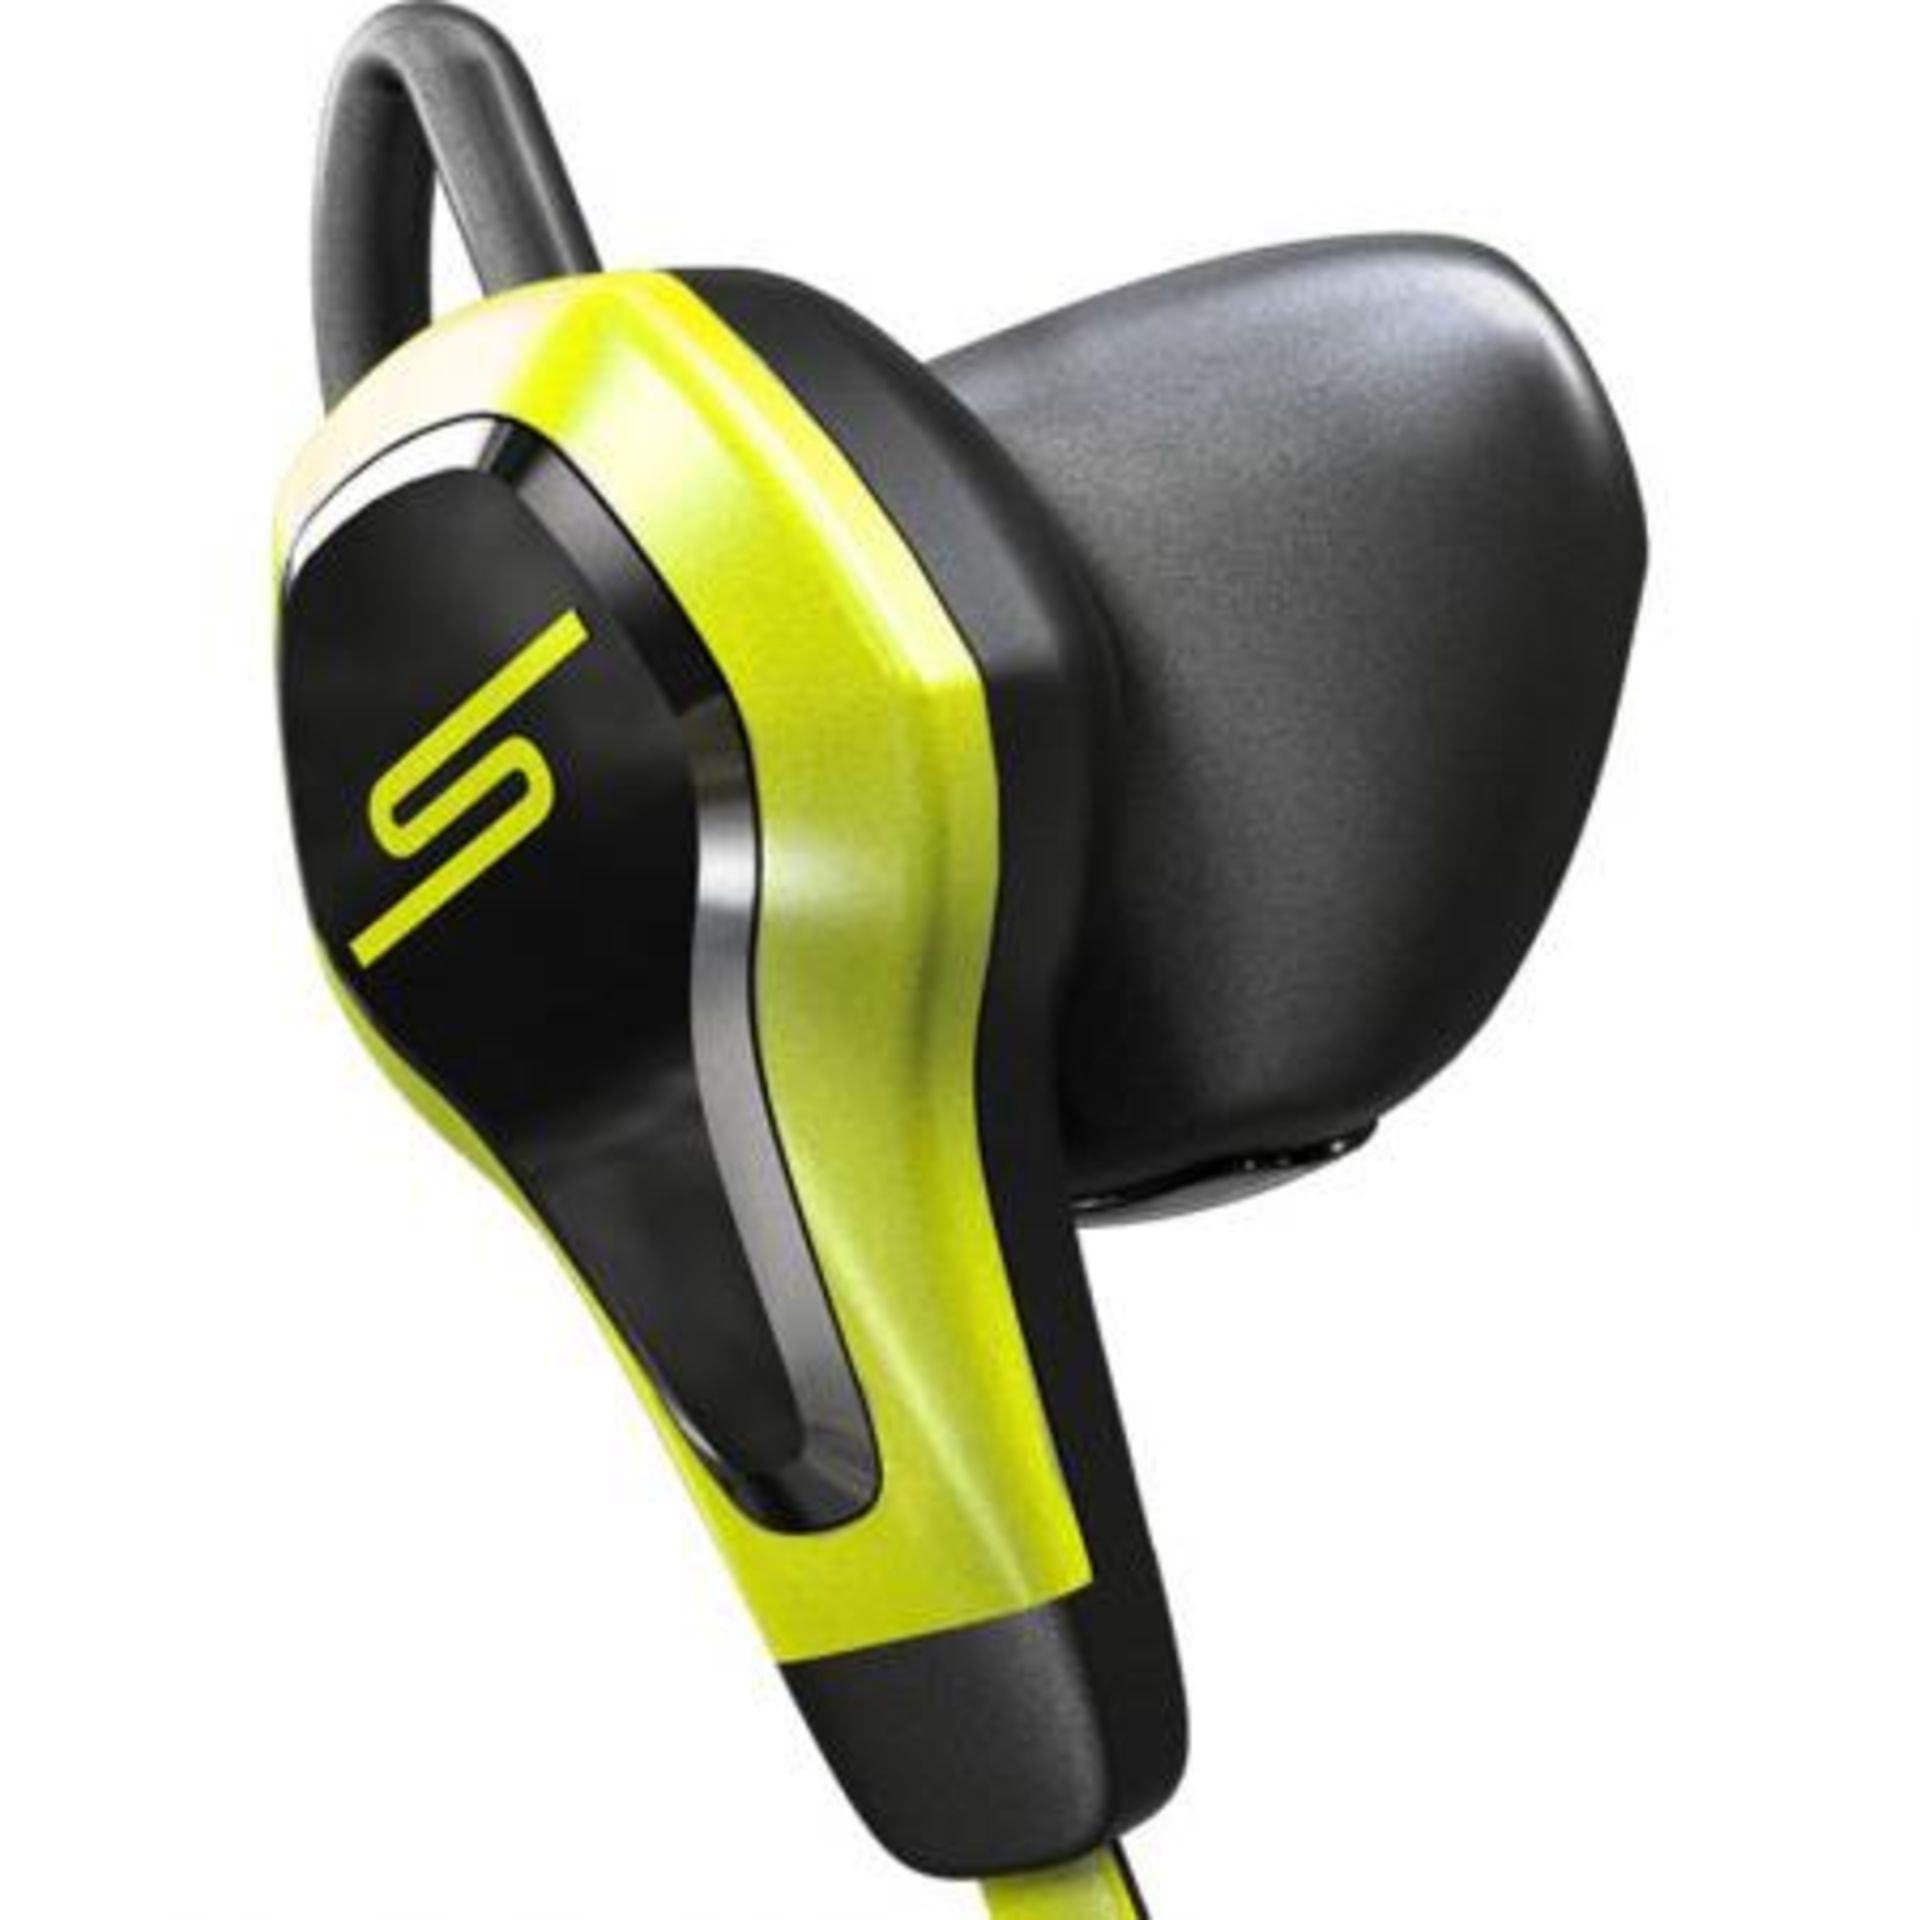 V *TRADE QTY* Brand New SMS Audio BioSport Earphones - Heart Rate Monitor Measures Changes In - Image 2 of 3